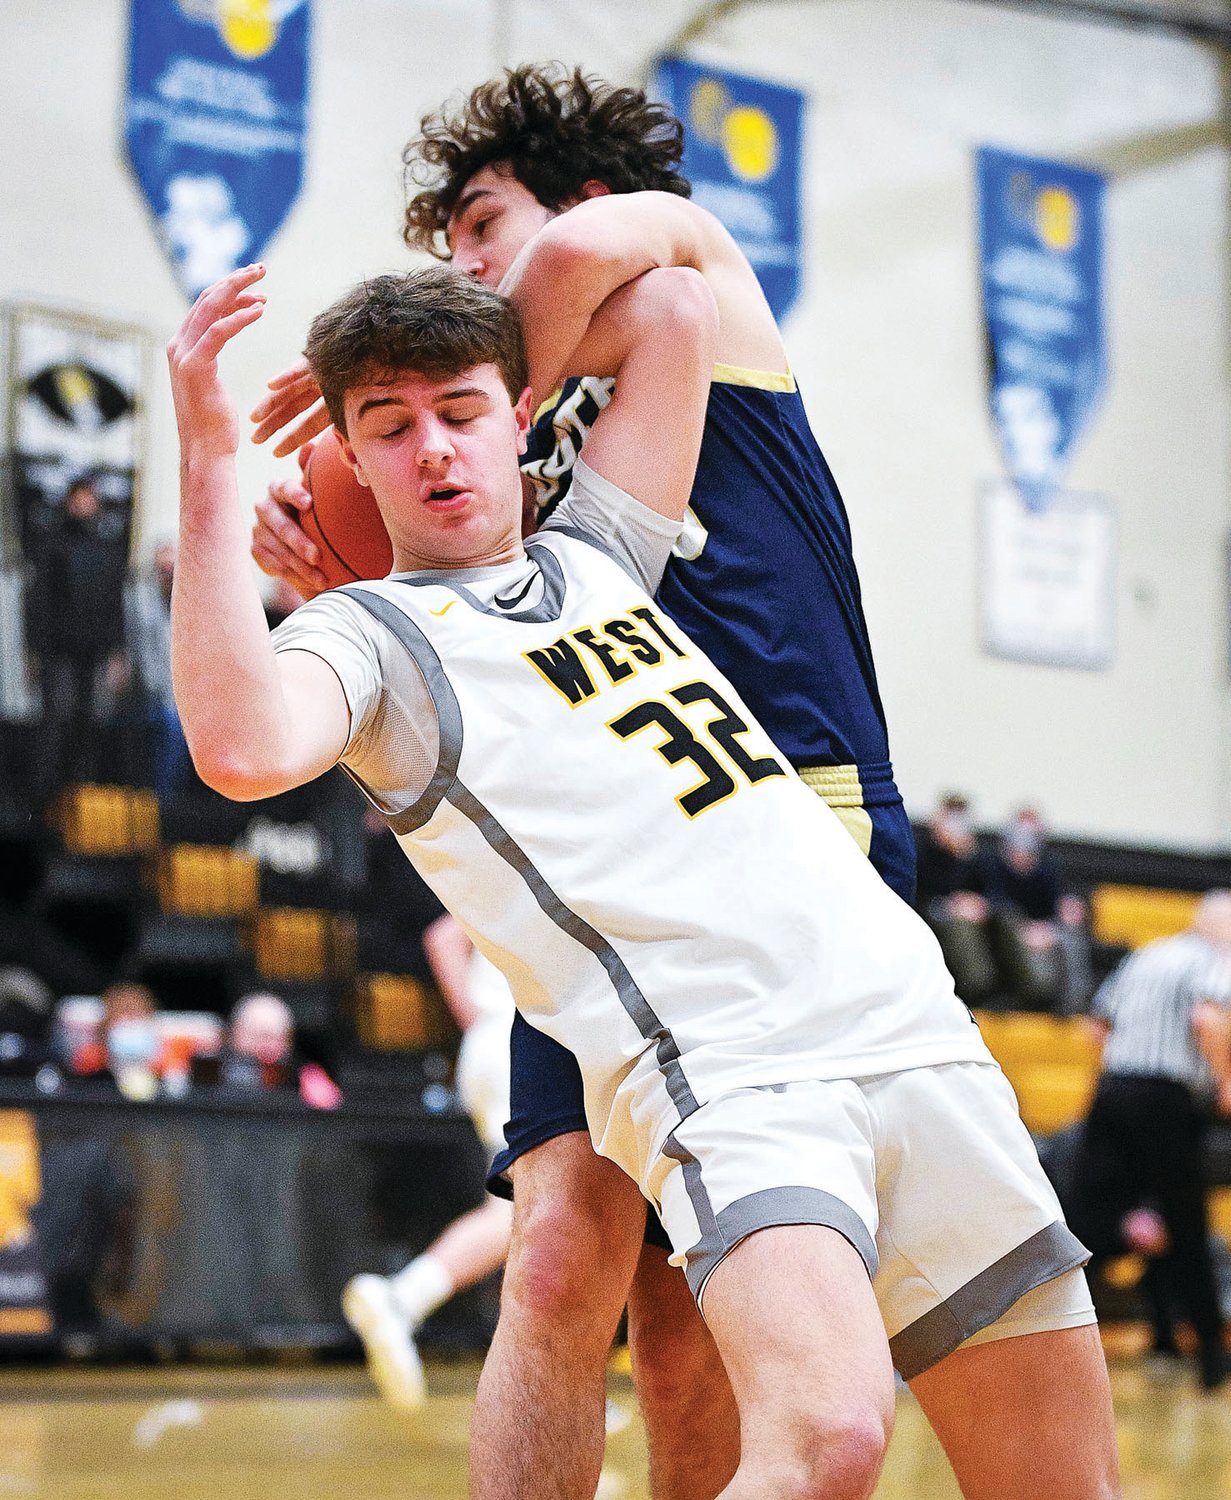 CB West’s Bowen Gugger gets hacked for a foul by CR South’s Chase Littig.